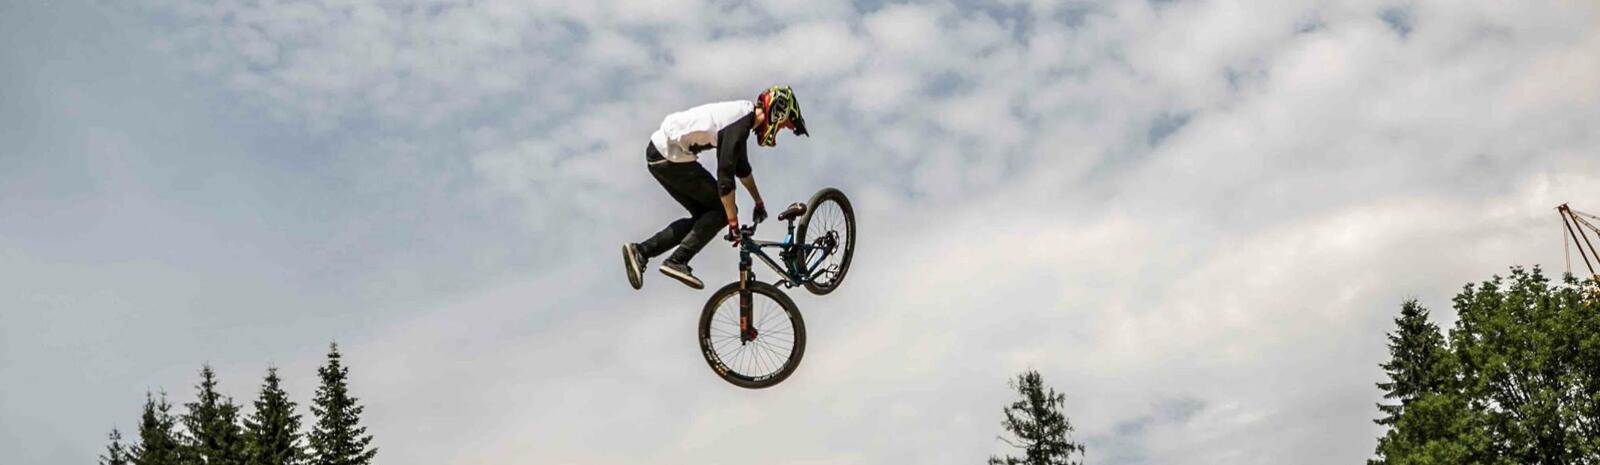 In action at the GlemmRide Slopestyle | © Rich Kurowski